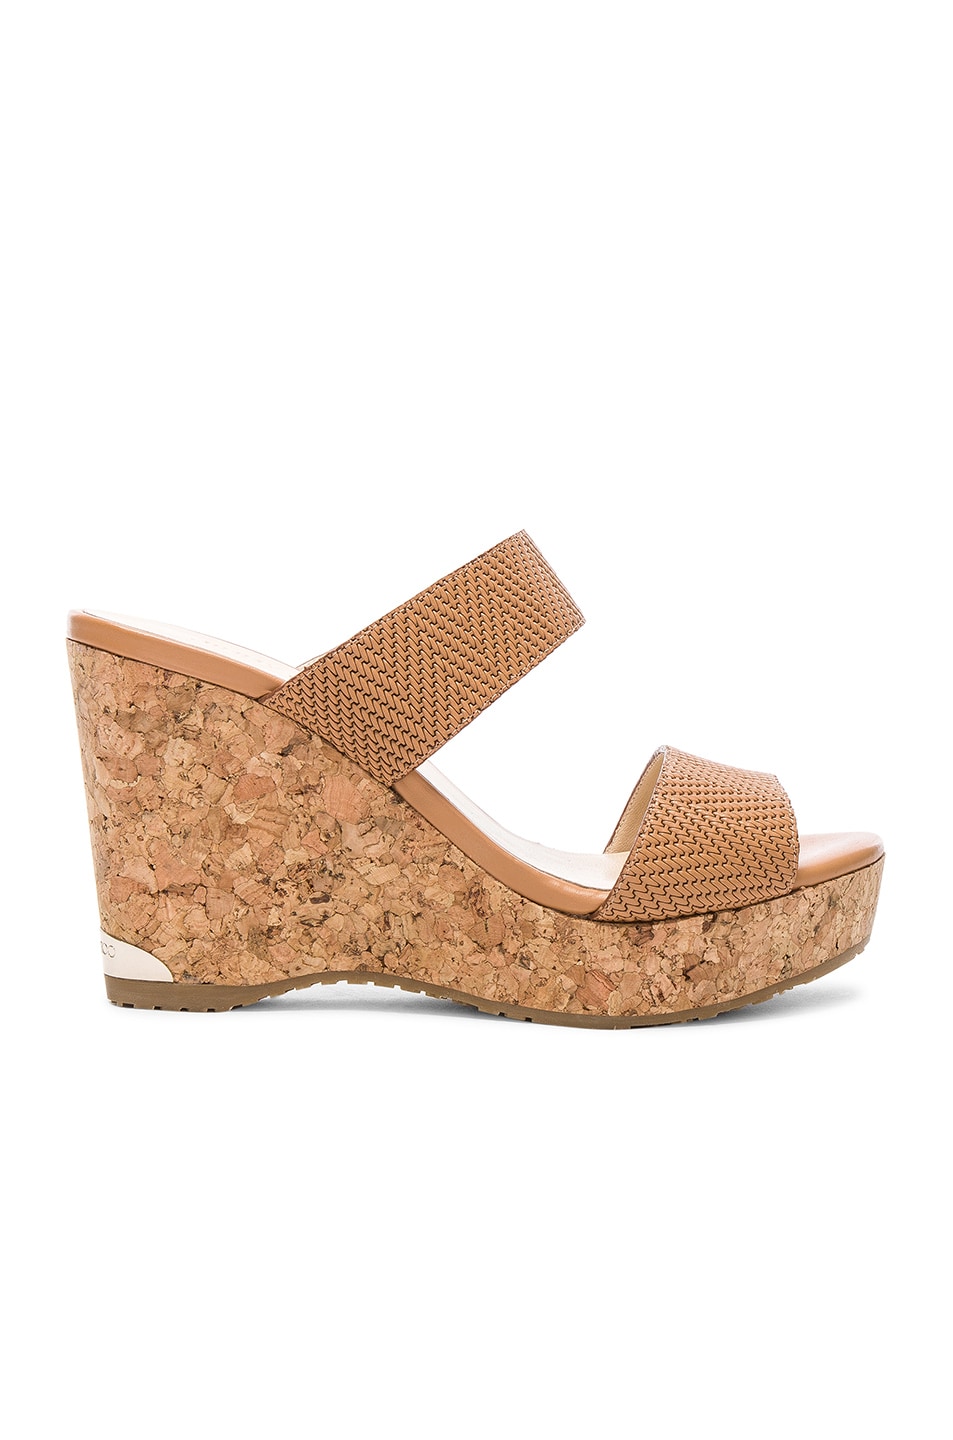 Image 1 of Jimmy Choo Parker 100 Embossed Leather Wedges in Tan